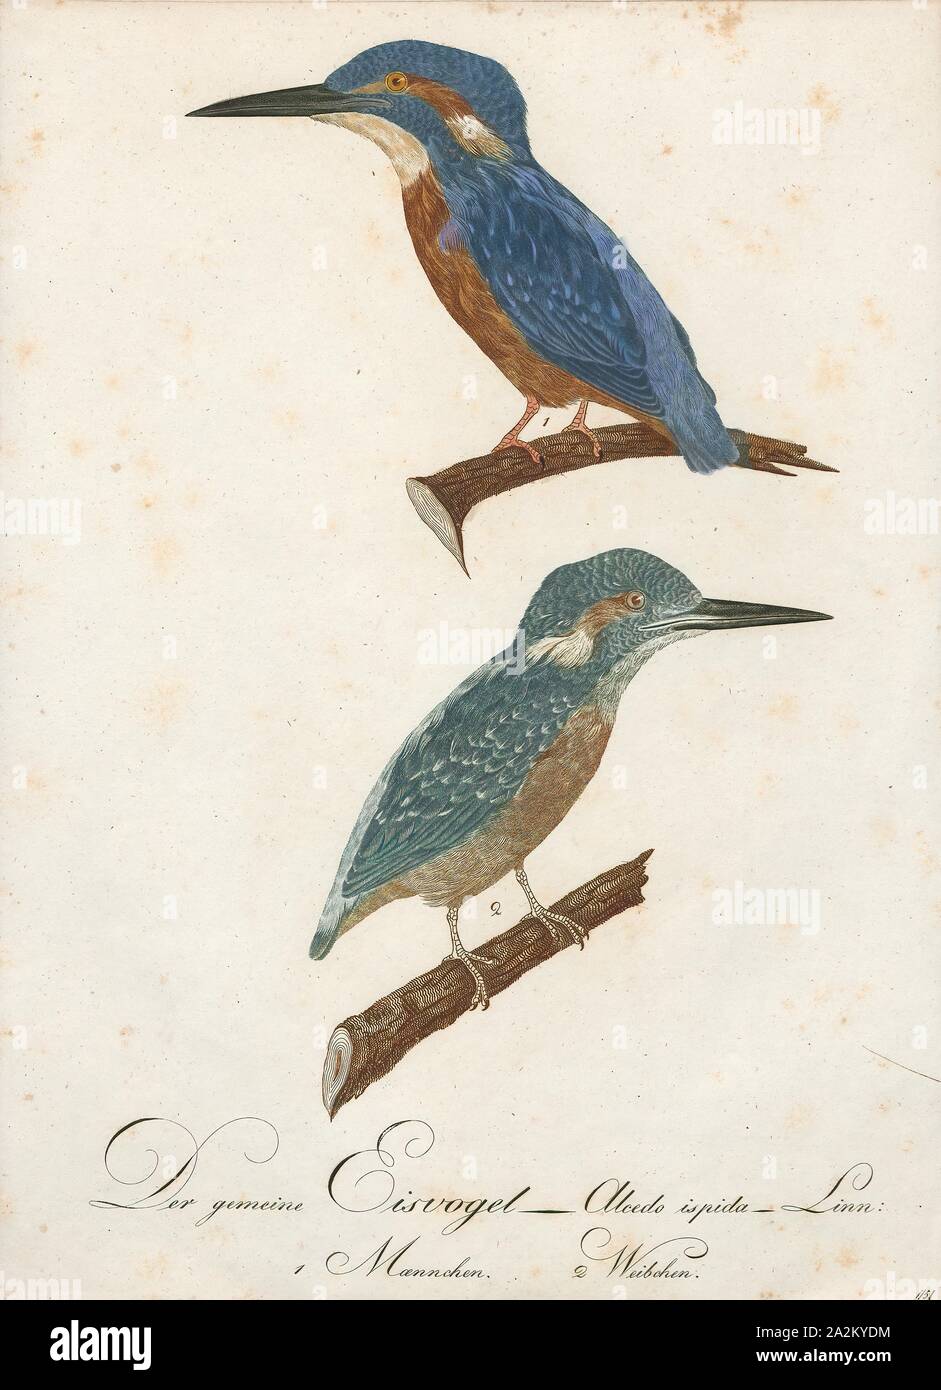 Alcedo ispida, Print, The common kingfisher (Alcedo atthis) also known as the Eurasian kingfisher, and river kingfisher, is a small kingfisher with seven subspecies recognized within its wide distribution across Eurasia and North Africa. It is resident in much of its range, but migrates from areas where rivers freeze in winter., 1800-1812 Stock Photo